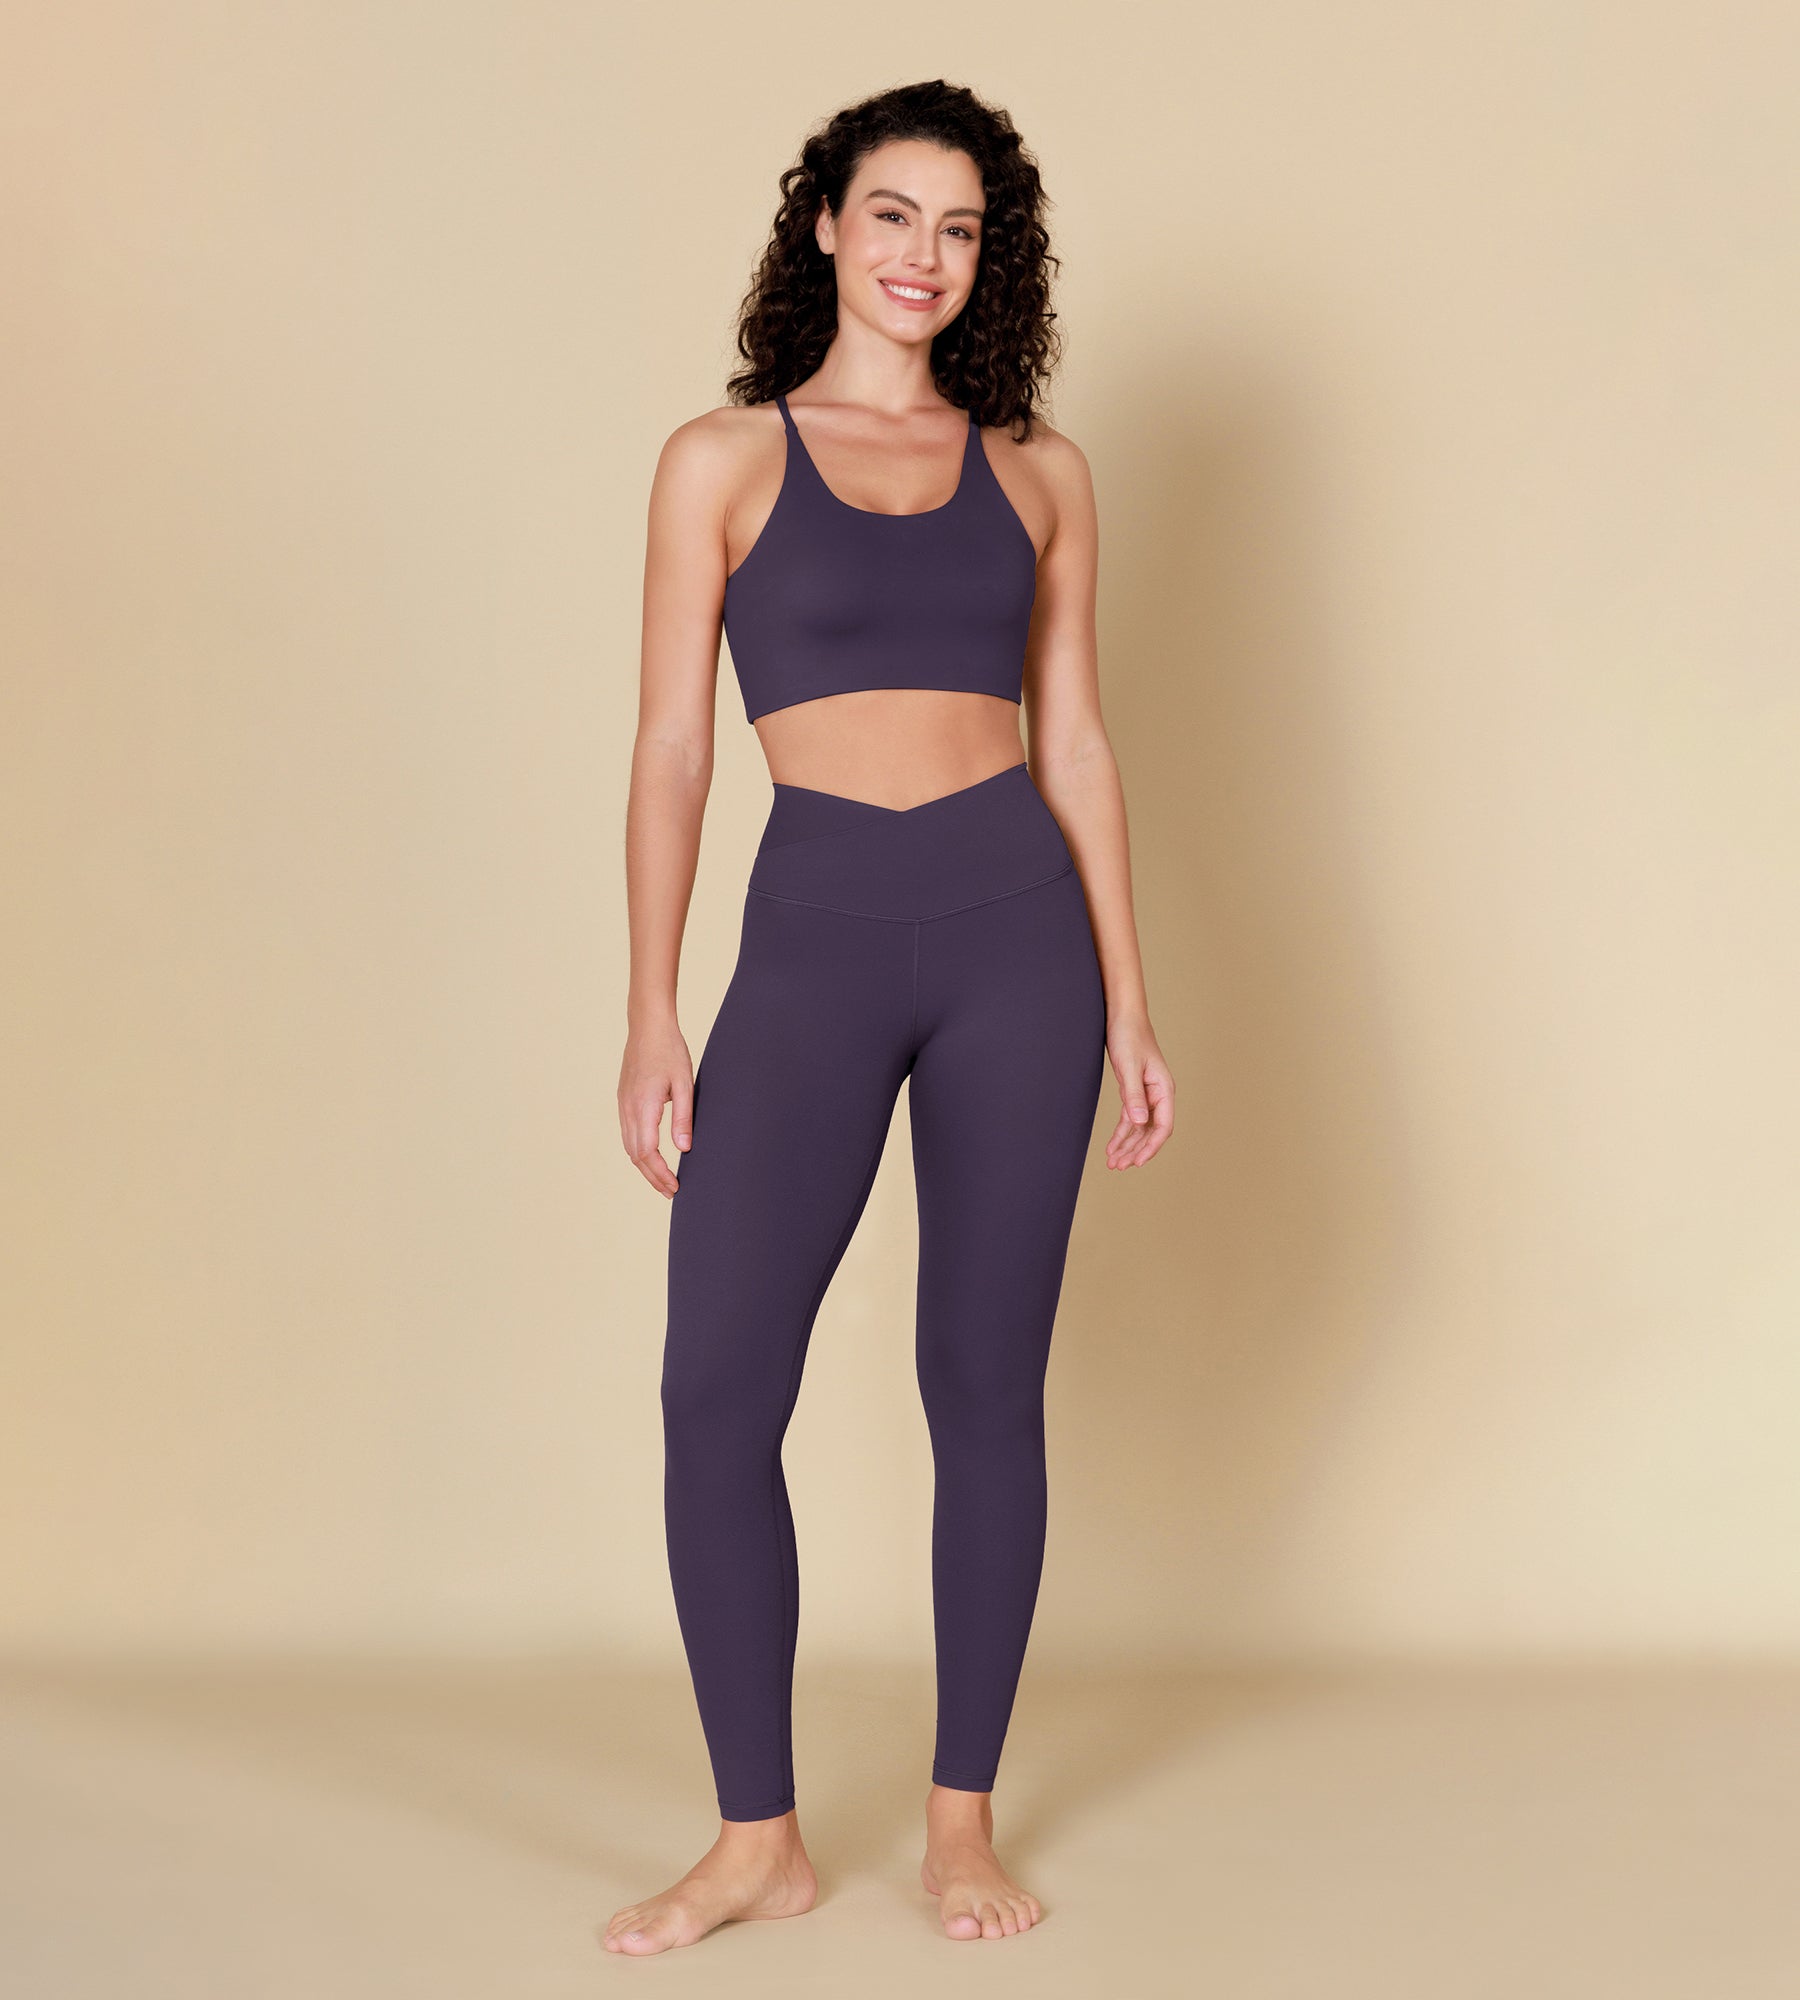 ODCLOUD Crossover 28" Leggings with Back Pocket - Classic Colors Dark Purple - ododos